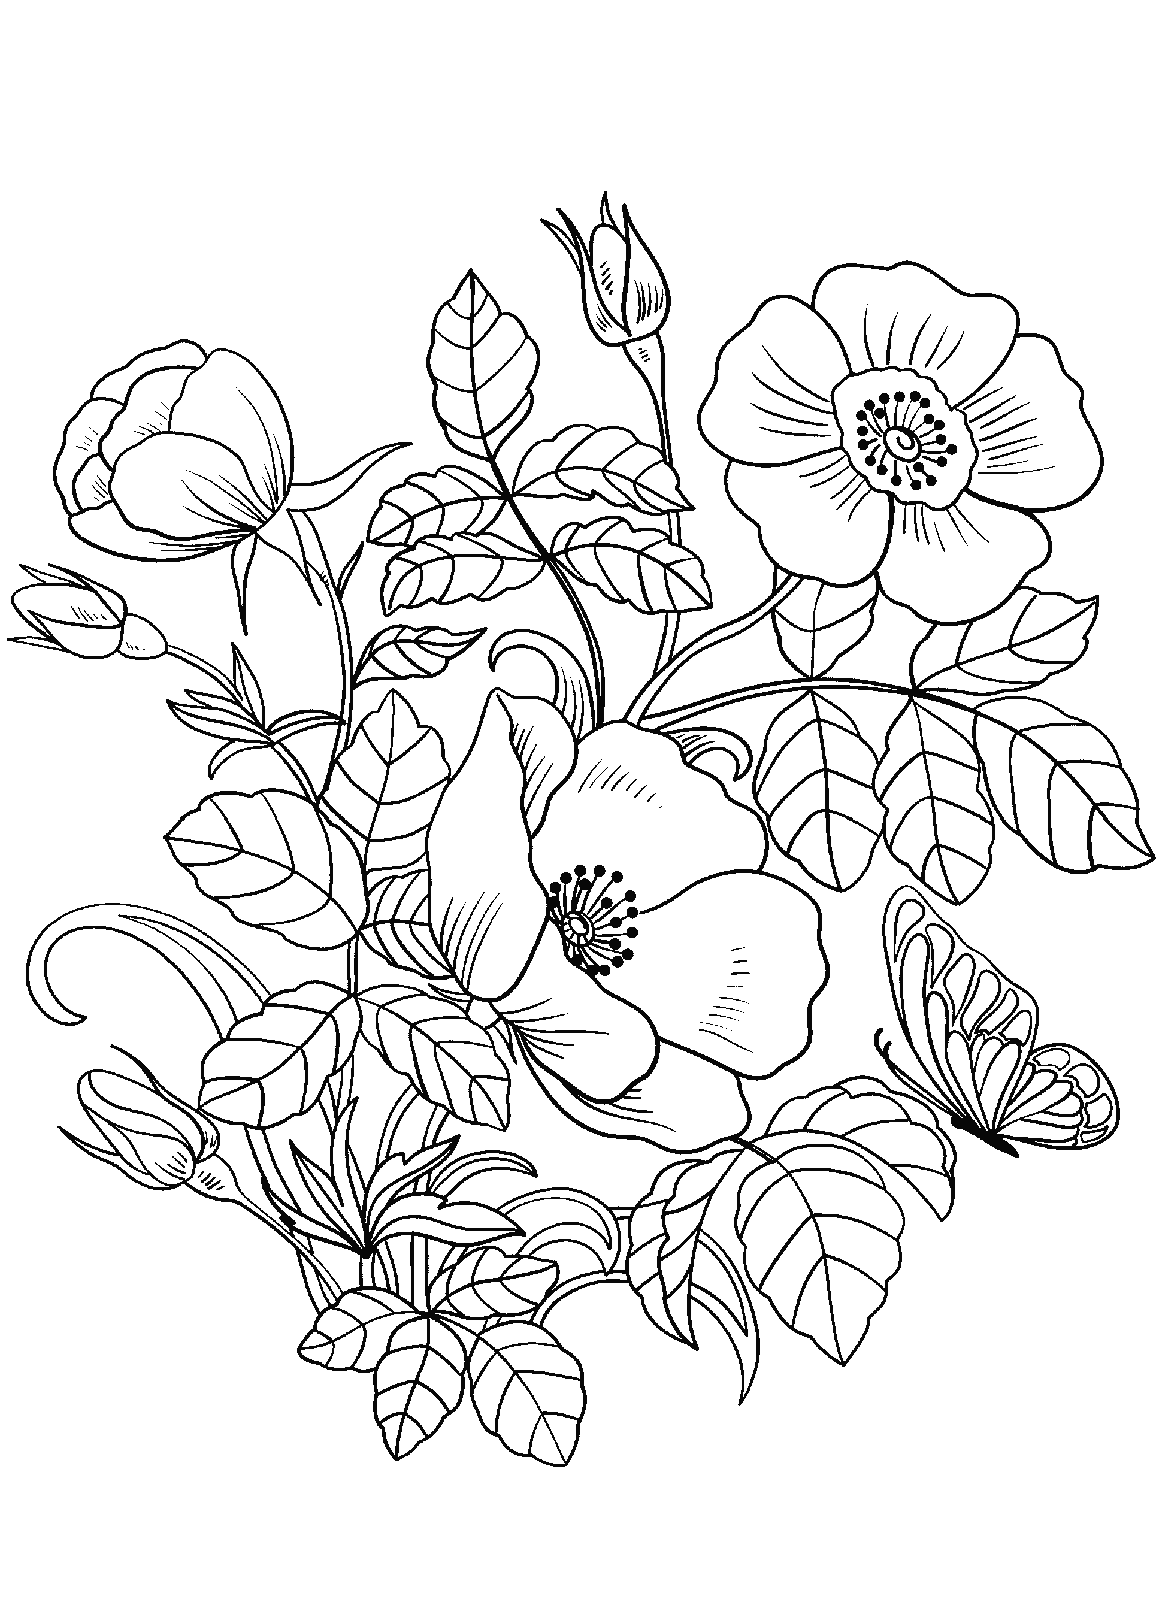 Butterflies and Spring Flowers Coloring Page